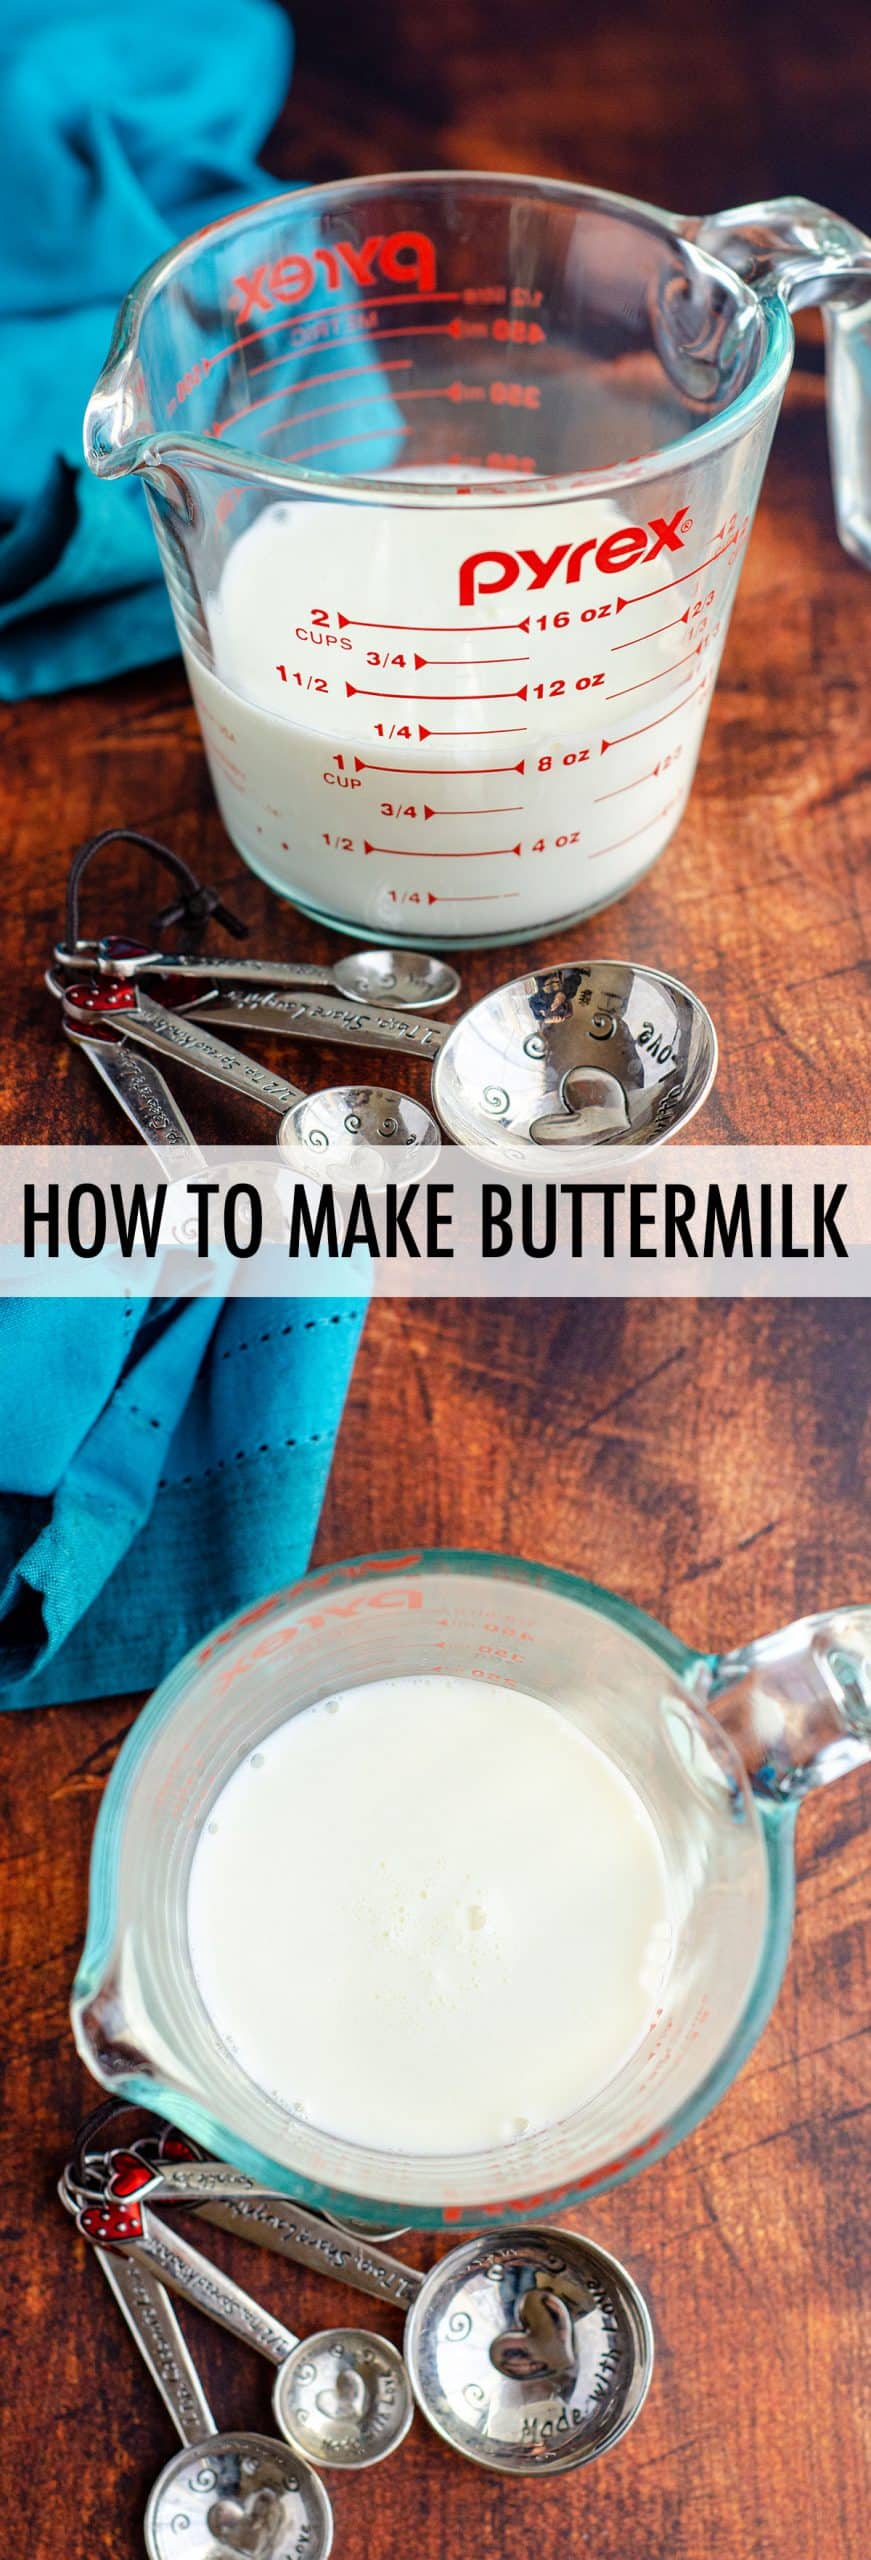 Learn how to make buttermilk in your own kitchen-- you only need 2 ingredients! via @frshaprilflours